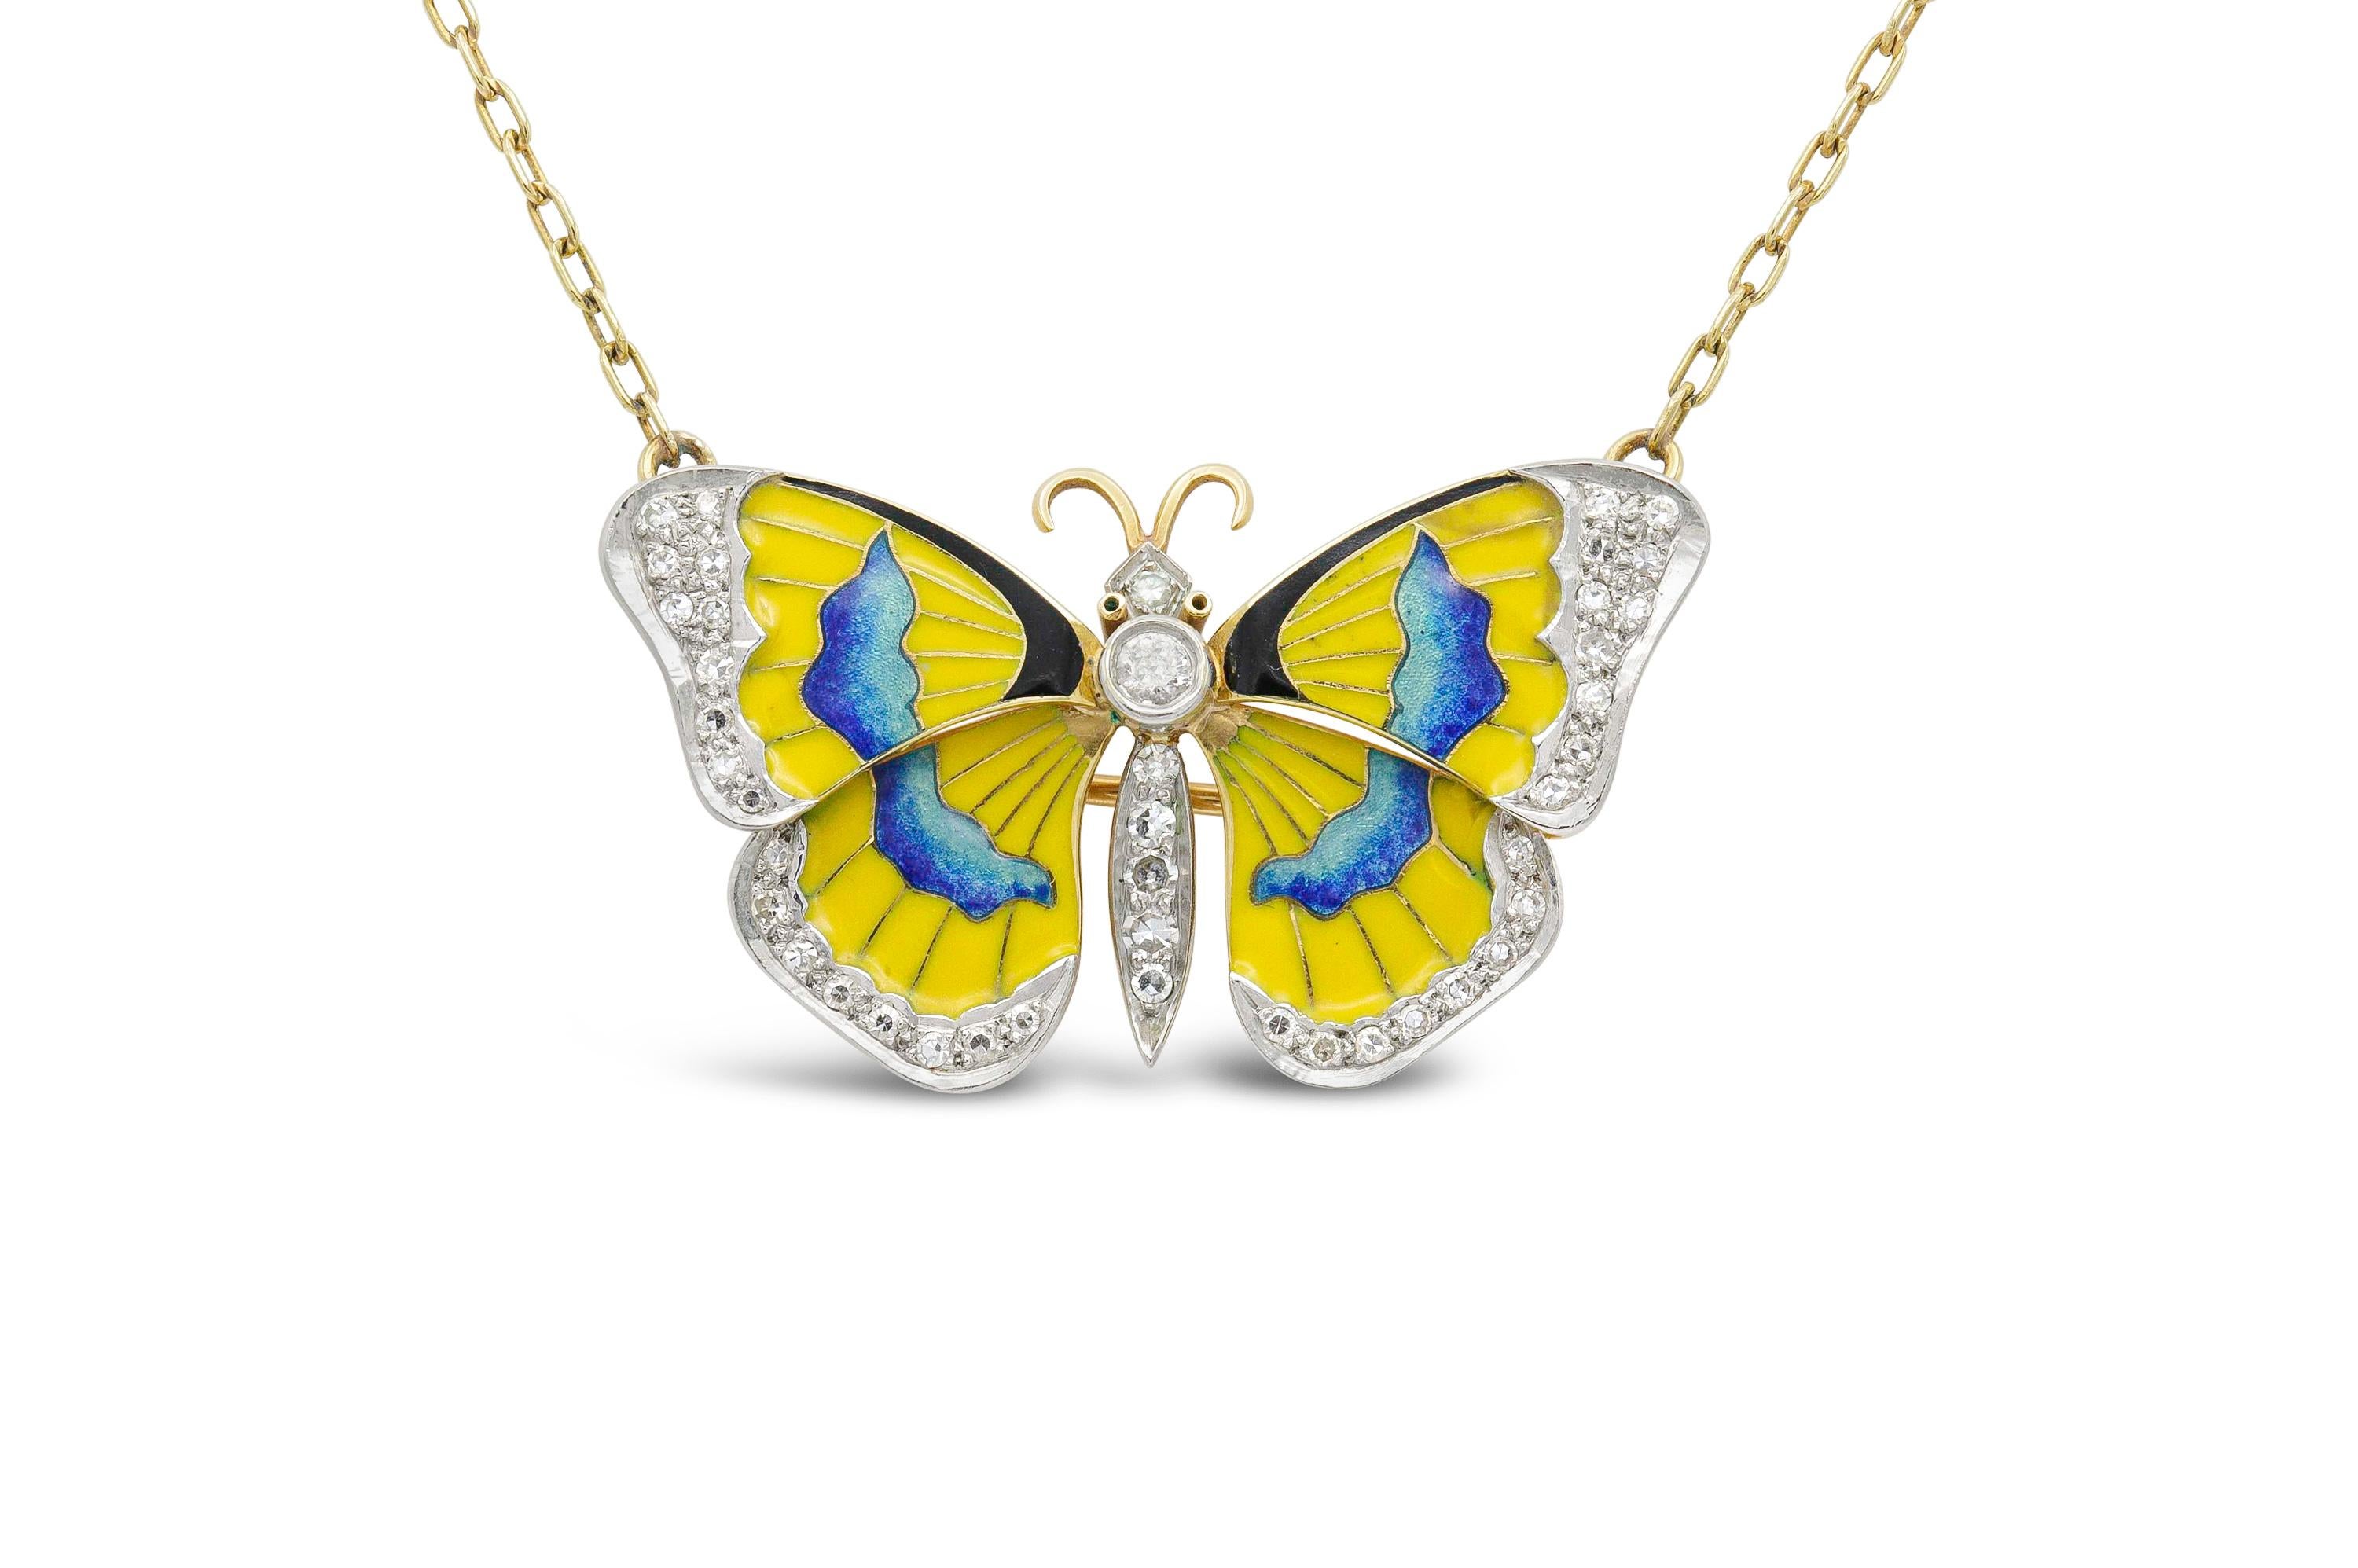 Finely crafted in 18K yellow gold with blue and yellow enamel and diamonds on the butterfly pin/pendant. 
Wearable as a pin or on 15-inch long VCA chain.
Signed and numbered by Van Cleef & Arpels.